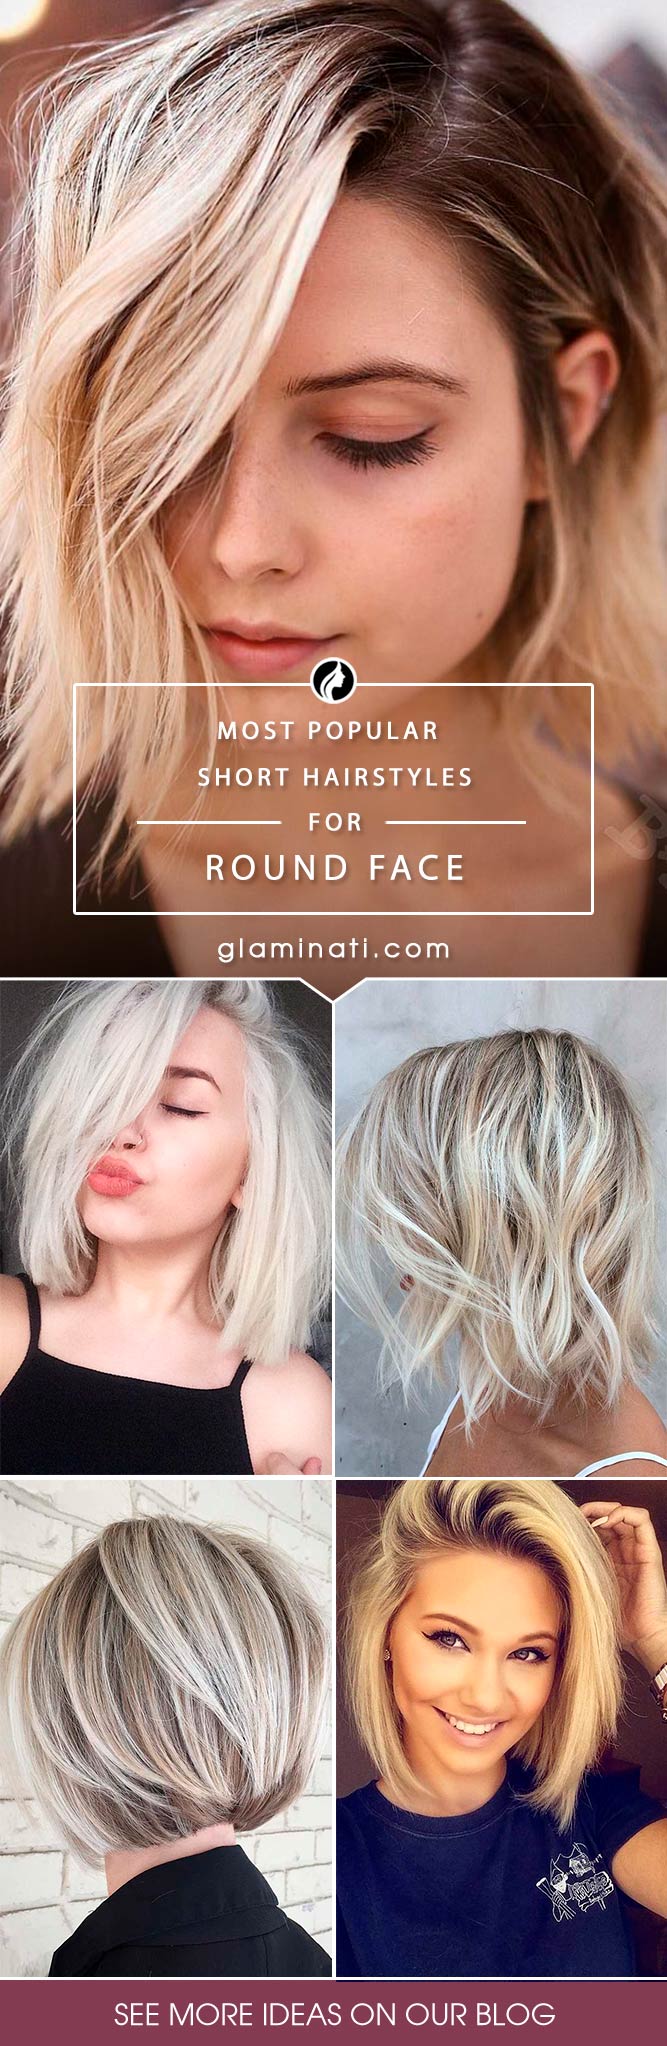 18 Blonde Short Hairstyles for Round Faces